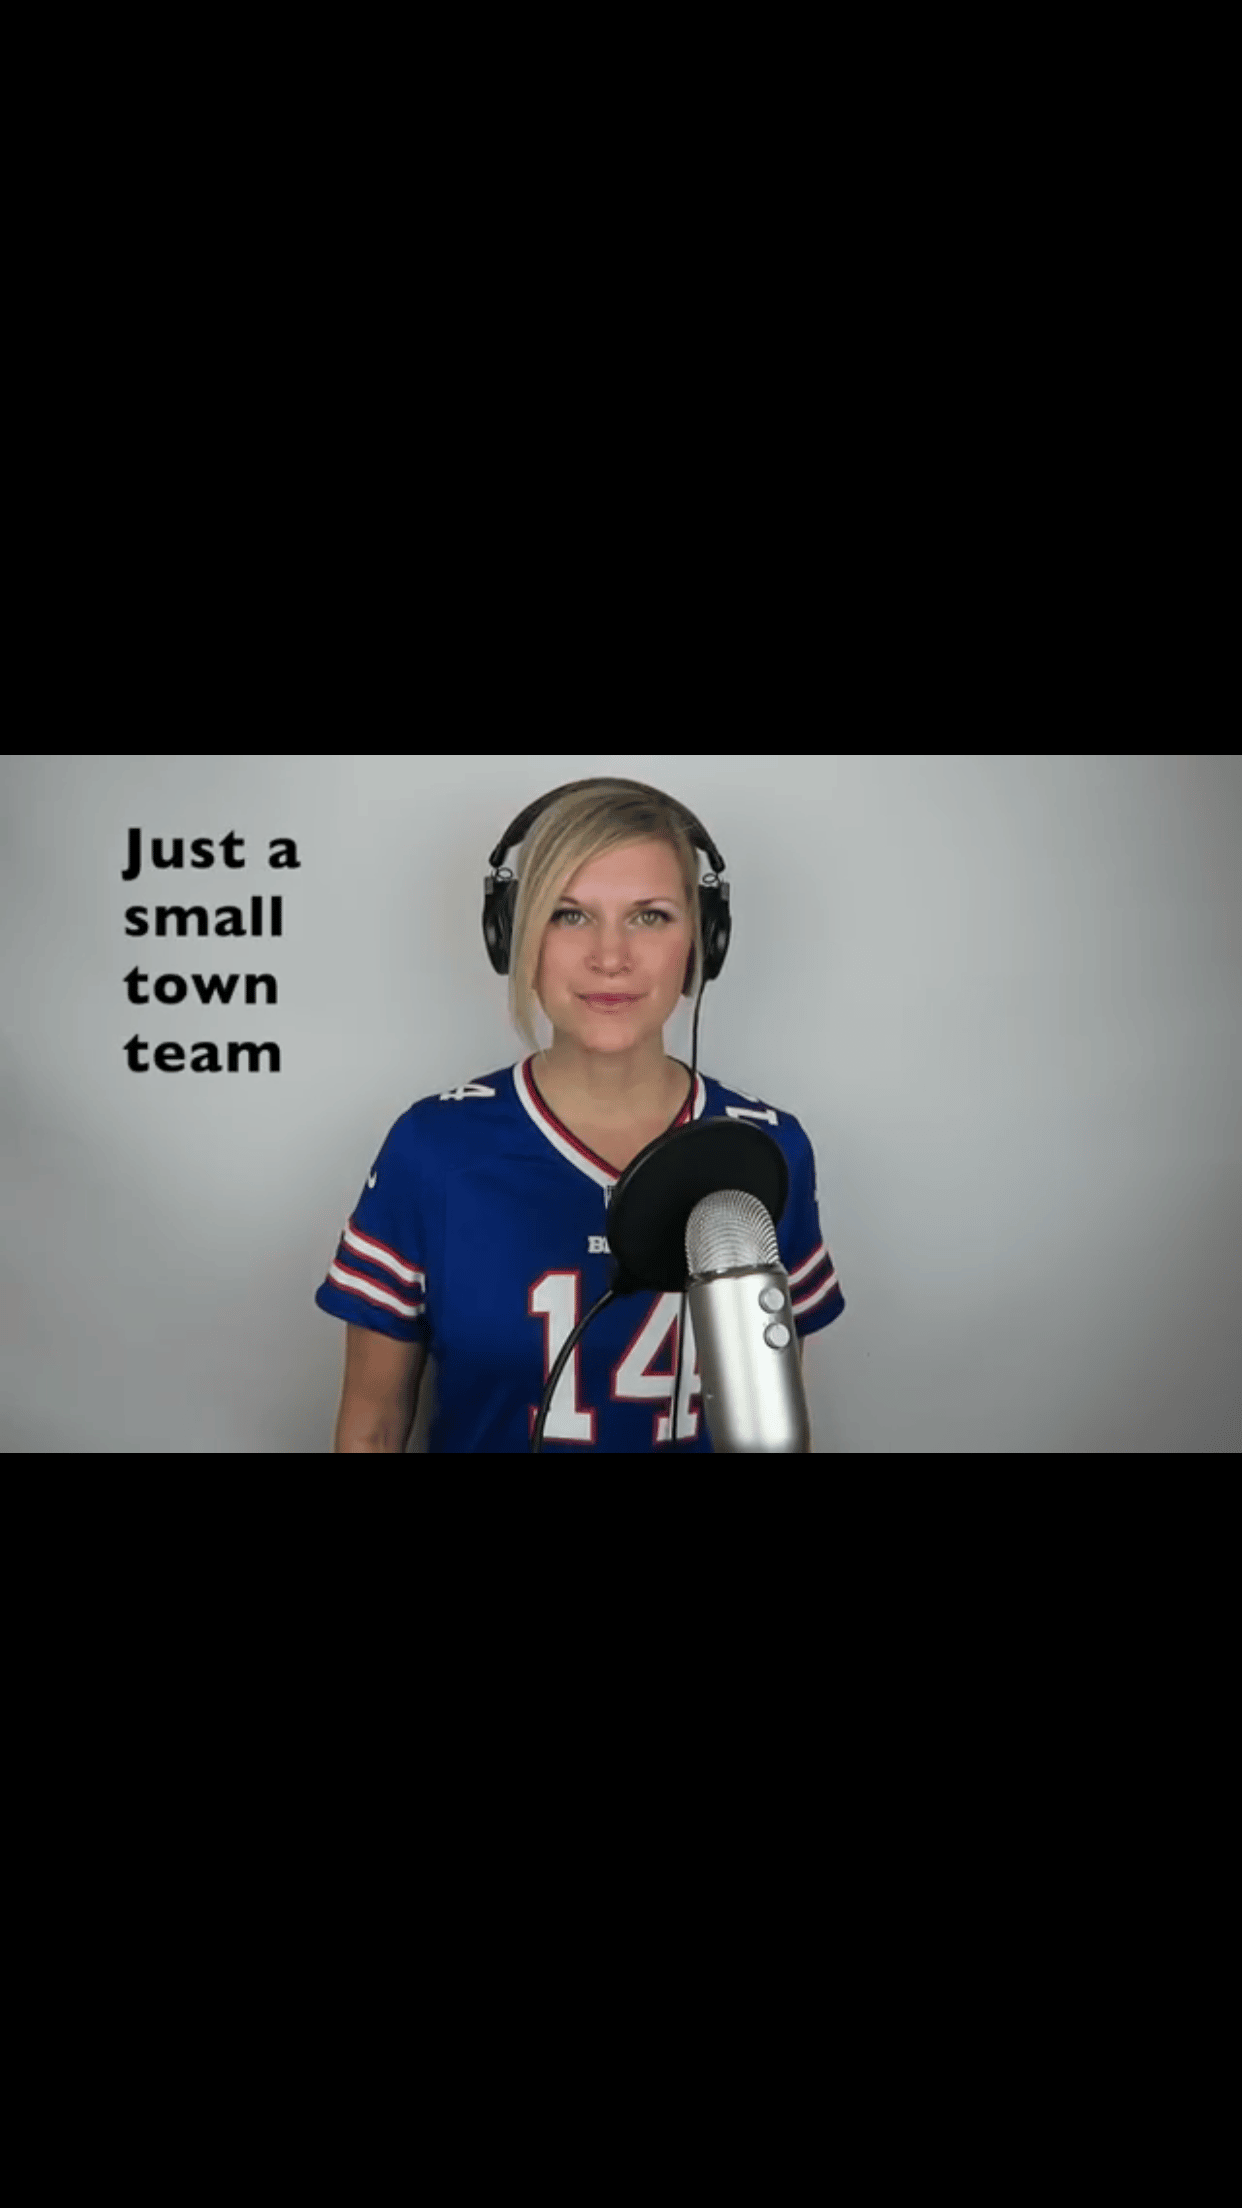 Awesome Bills playoffs song! Don’t stop believing… never stop believing! (In this case, Bill-ieving)